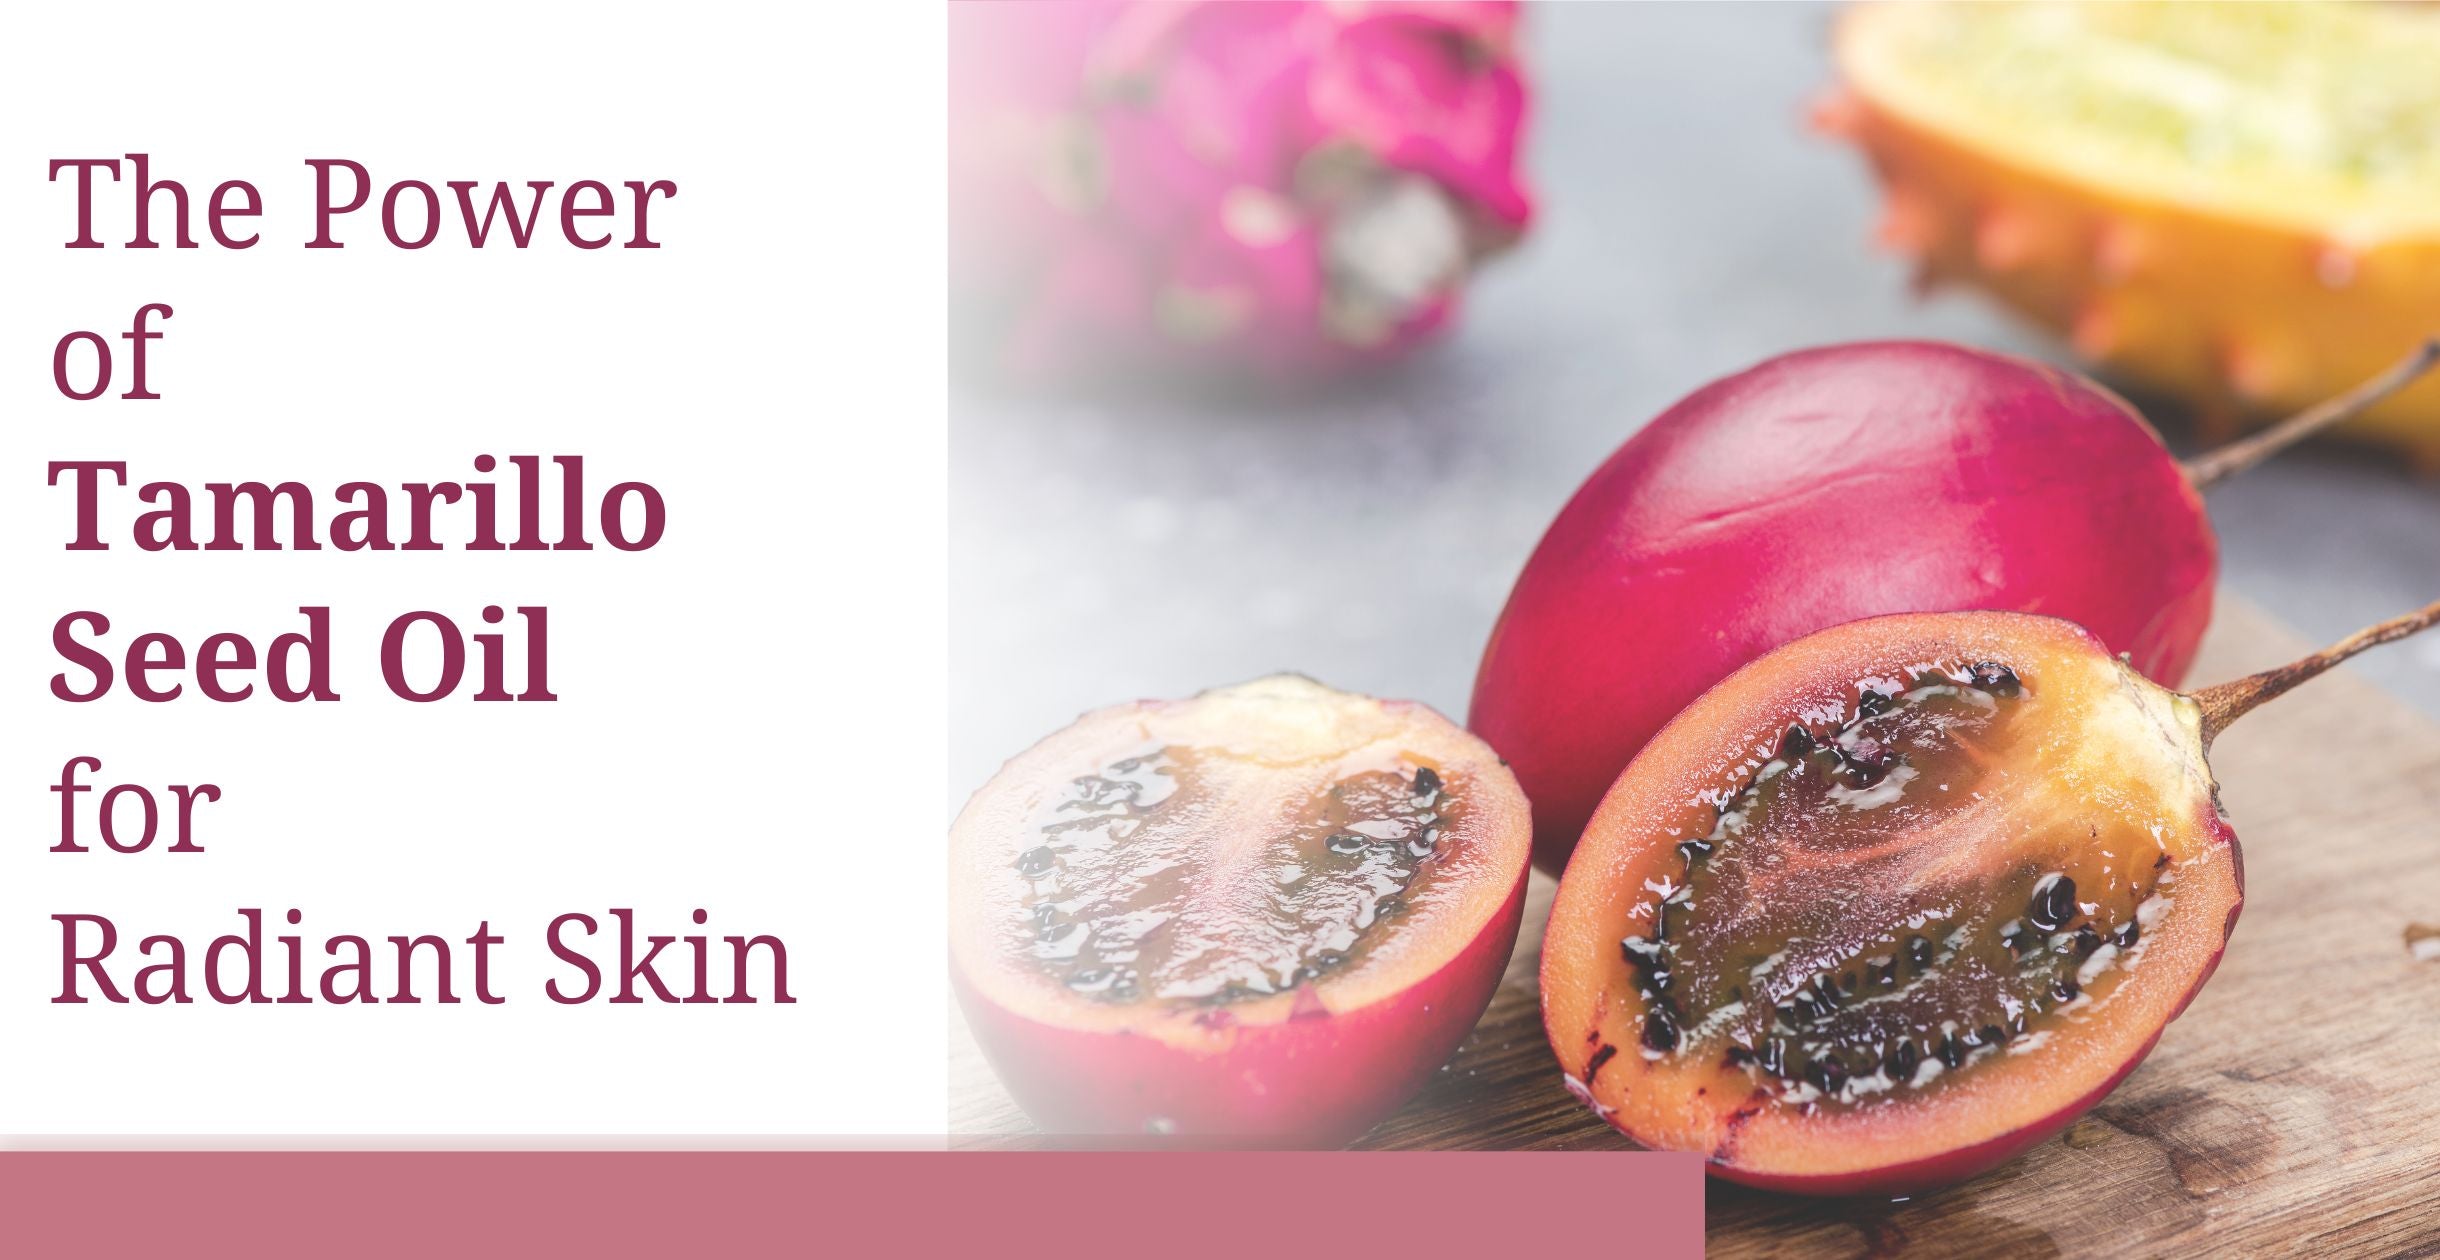 The Power of Tamarillo Seed Oil for Radiant Skin